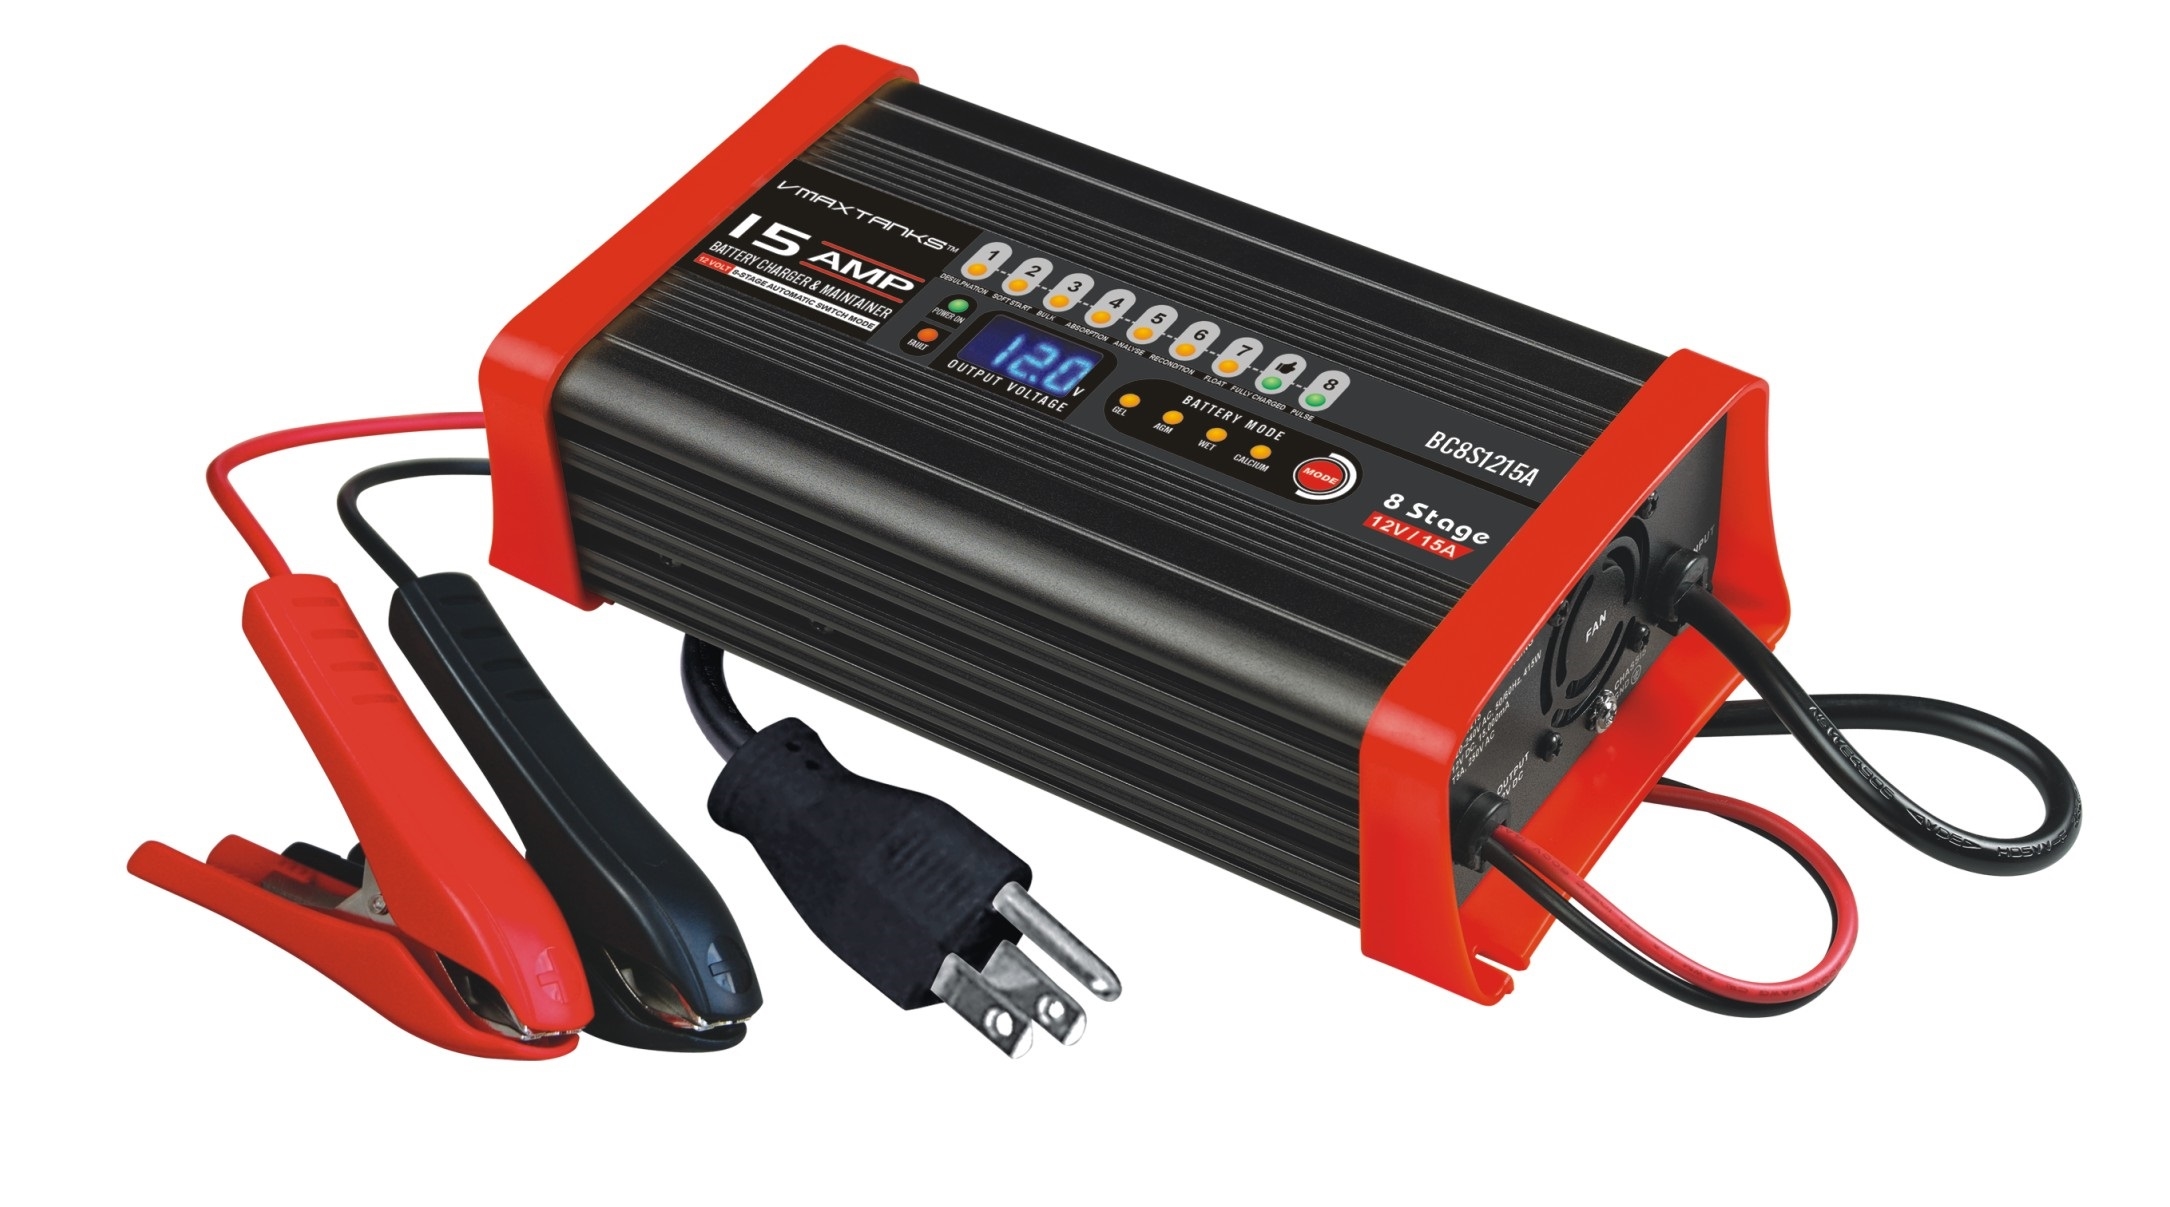 SMART CHARGER VMAXTANKS BC8S1215A 12V 15A 8 Stage Compatible with Optima Blue TOP COMP Battery Smart Charger/Maintainer - image 1 of 1